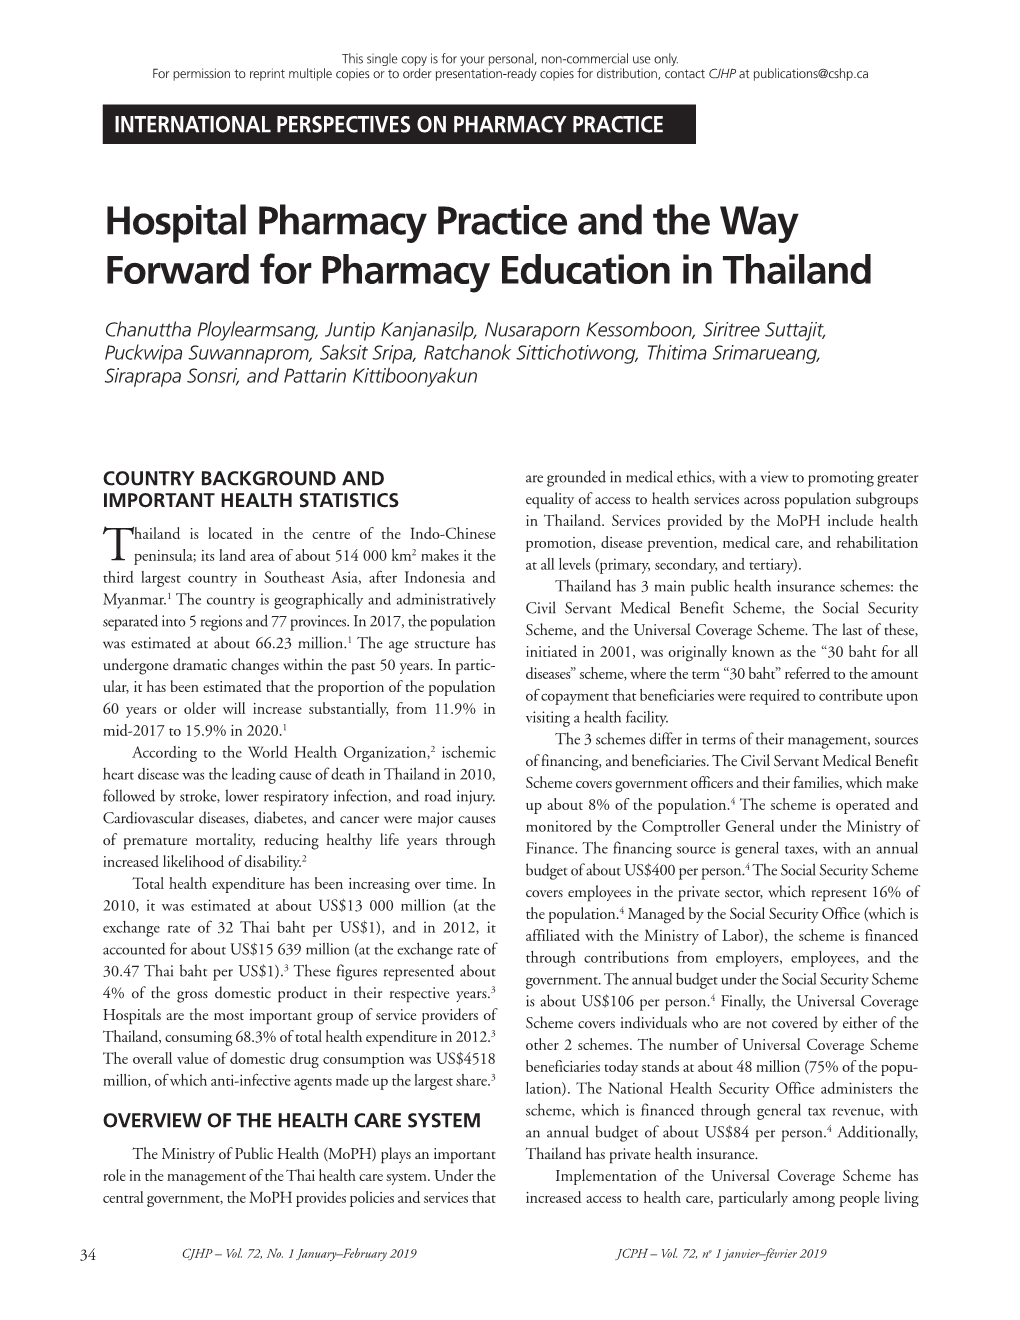 Hospital Pharmacy Practice and the Way Forward for Pharmacy Education in Thailand